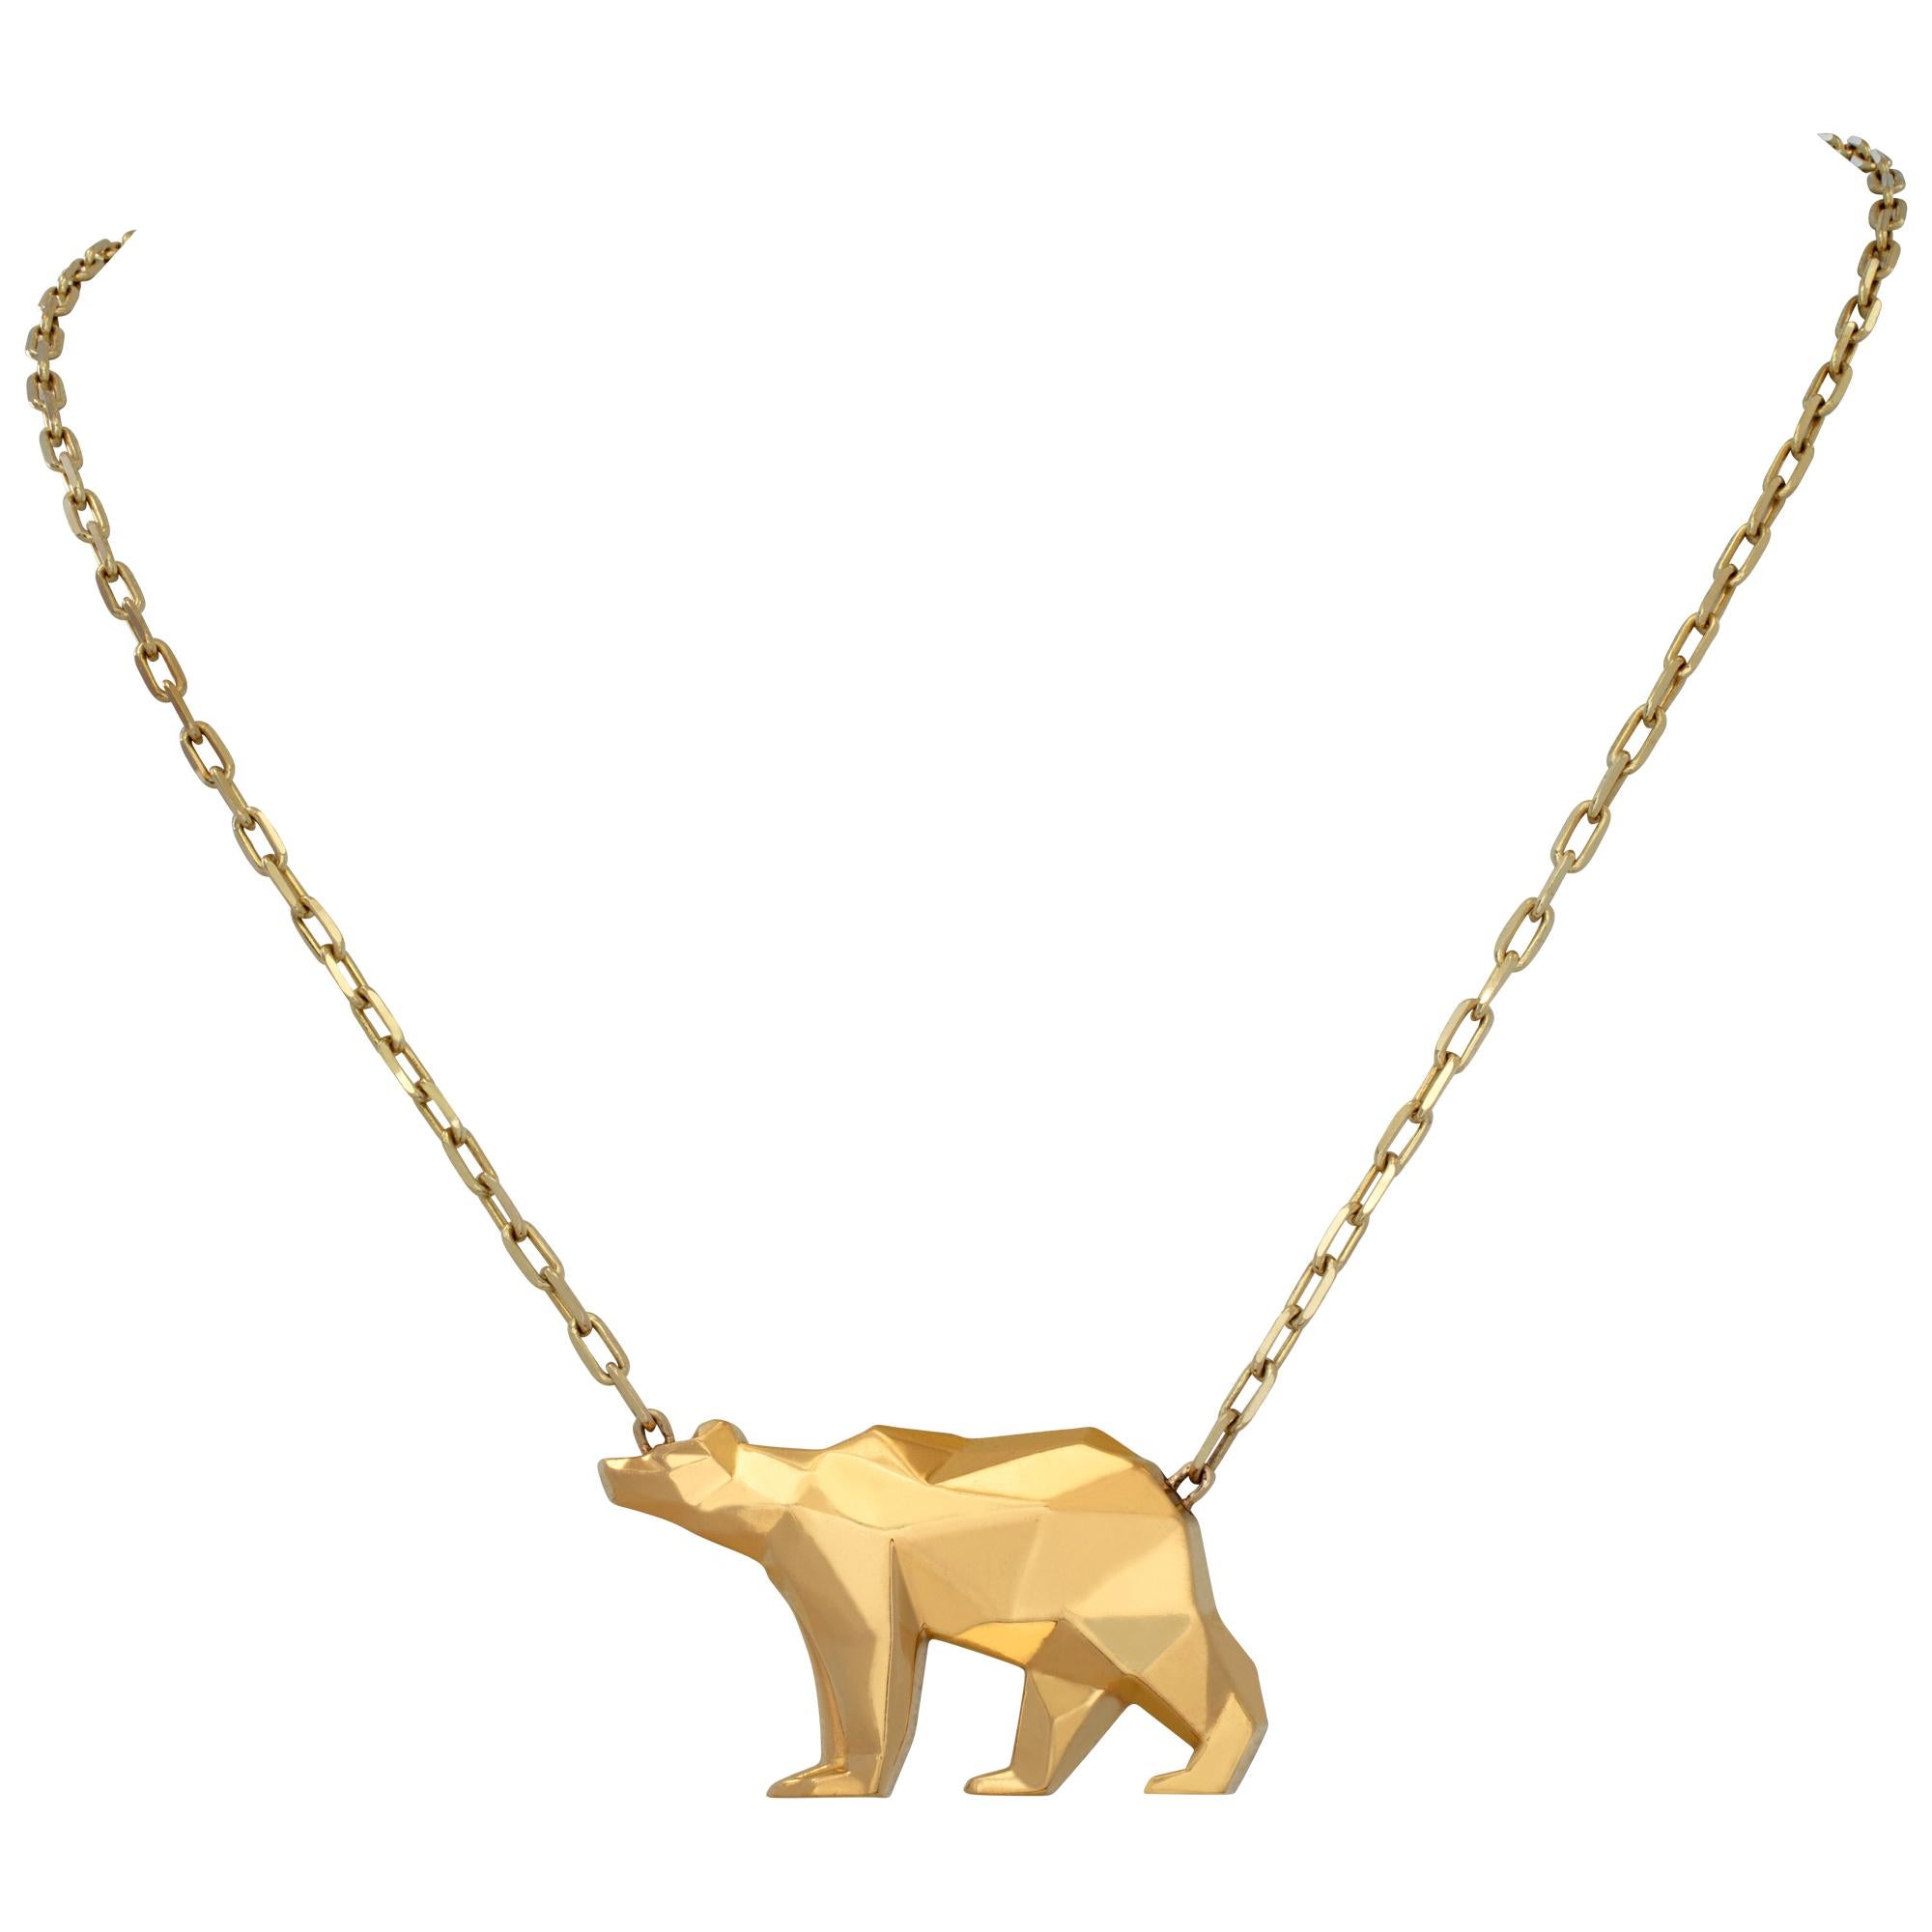 Bear pendant in 24k gold. Contains almost 1 oz of pure California .999 gold with 18k yellow gold chain. Limited edition No. 004. Measures 18 inches.
